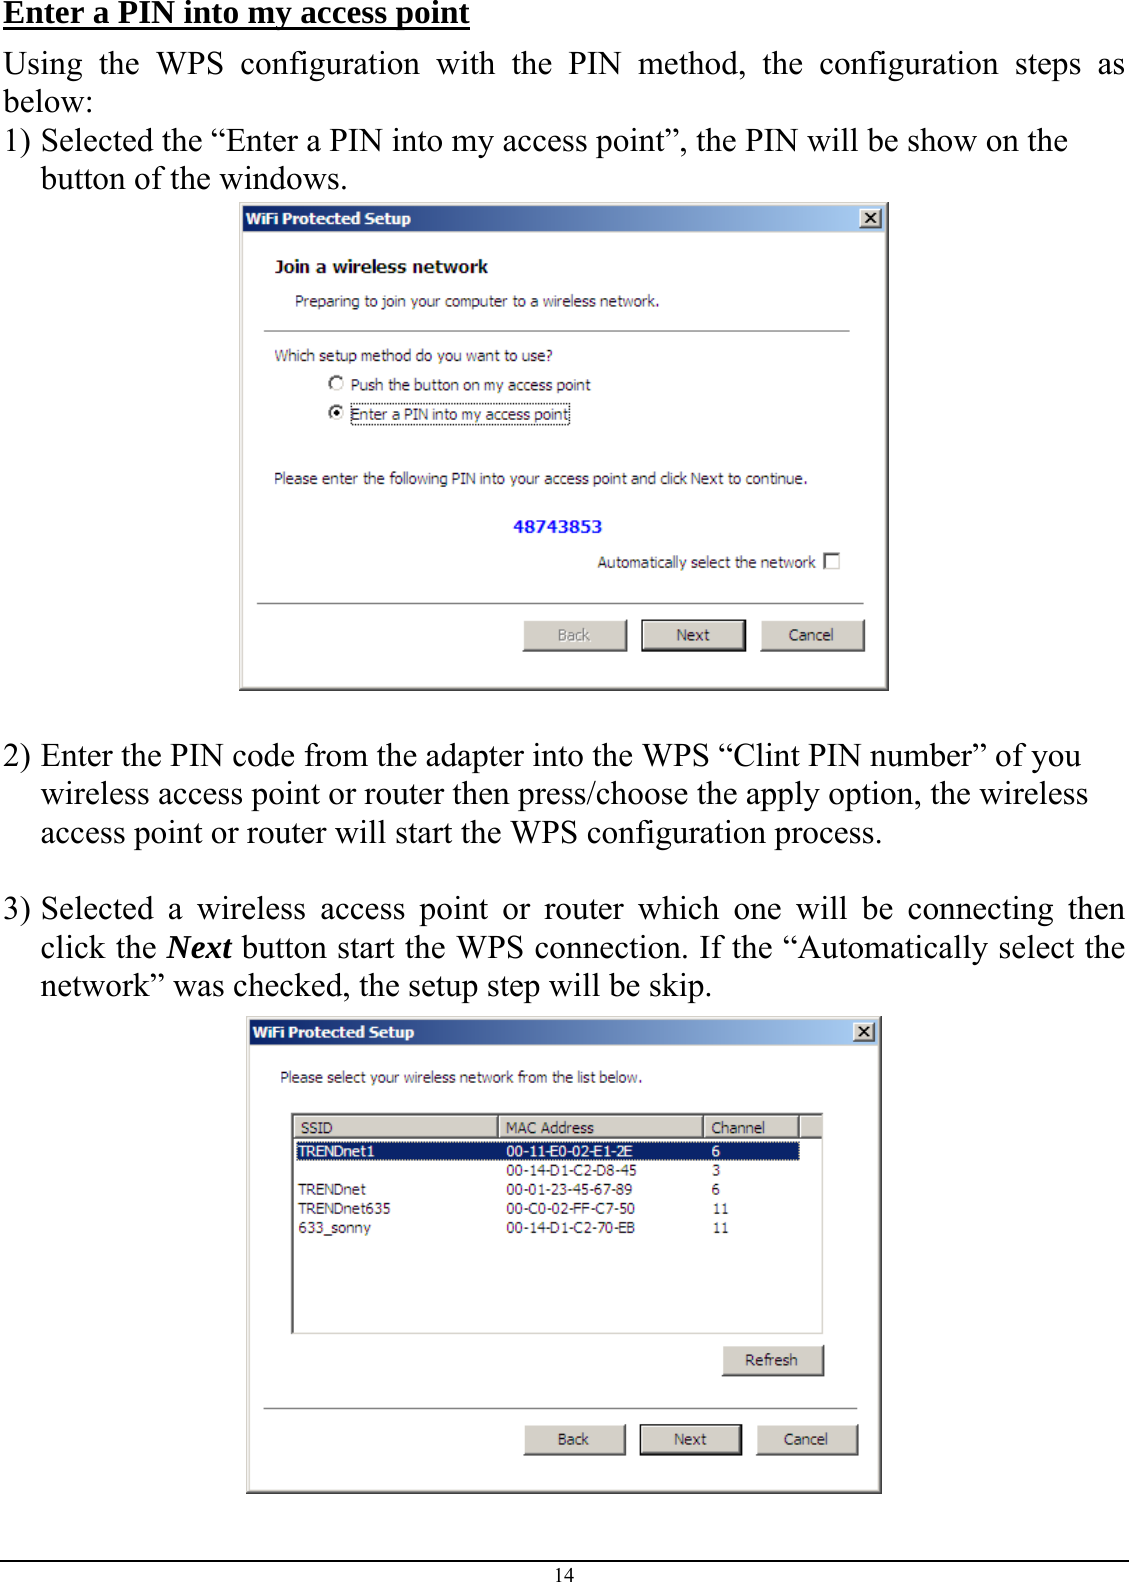  Enter a PIN into my access point Using the WPS configuration with the PIN method, the configuration steps as below: 1) Selected the “Enter a PIN into my access point”, the PIN will be show on the button of the windows.   2) Enter the PIN code from the adapter into the WPS “Clint PIN number” of you wireless access point or router then press/choose the apply option, the wireless access point or router will start the WPS configuration process.  3) Selected a wireless access point or router which one will be connecting then click the Next button start the WPS connection. If the “Automatically select the network” was checked, the setup step will be skip.  14 